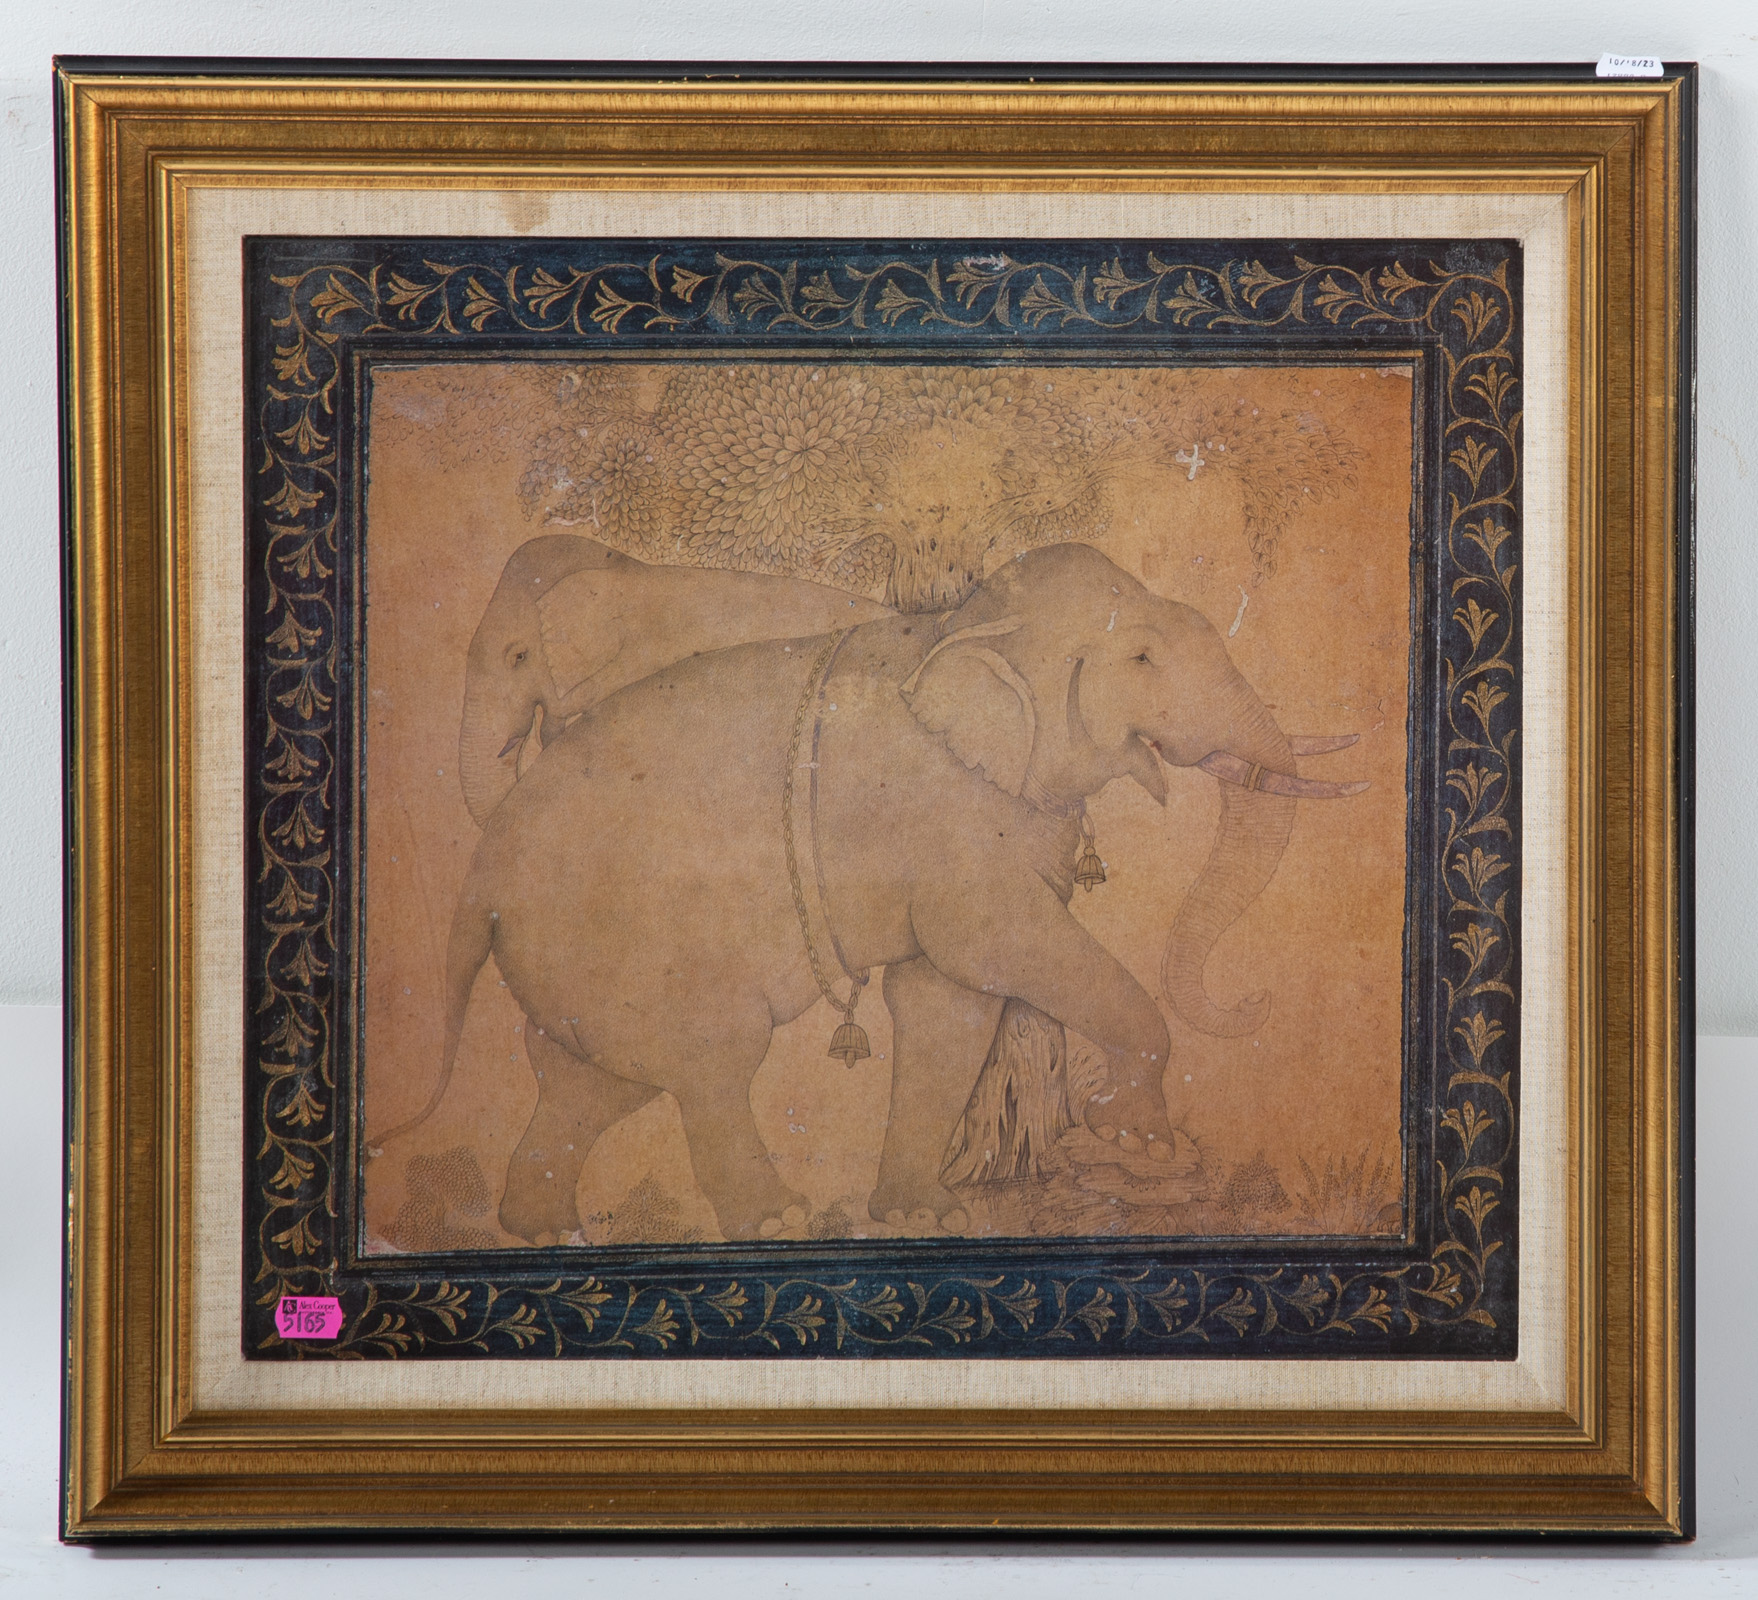 COLOR PRINT OF TWO INDIAN ELEPHANTS